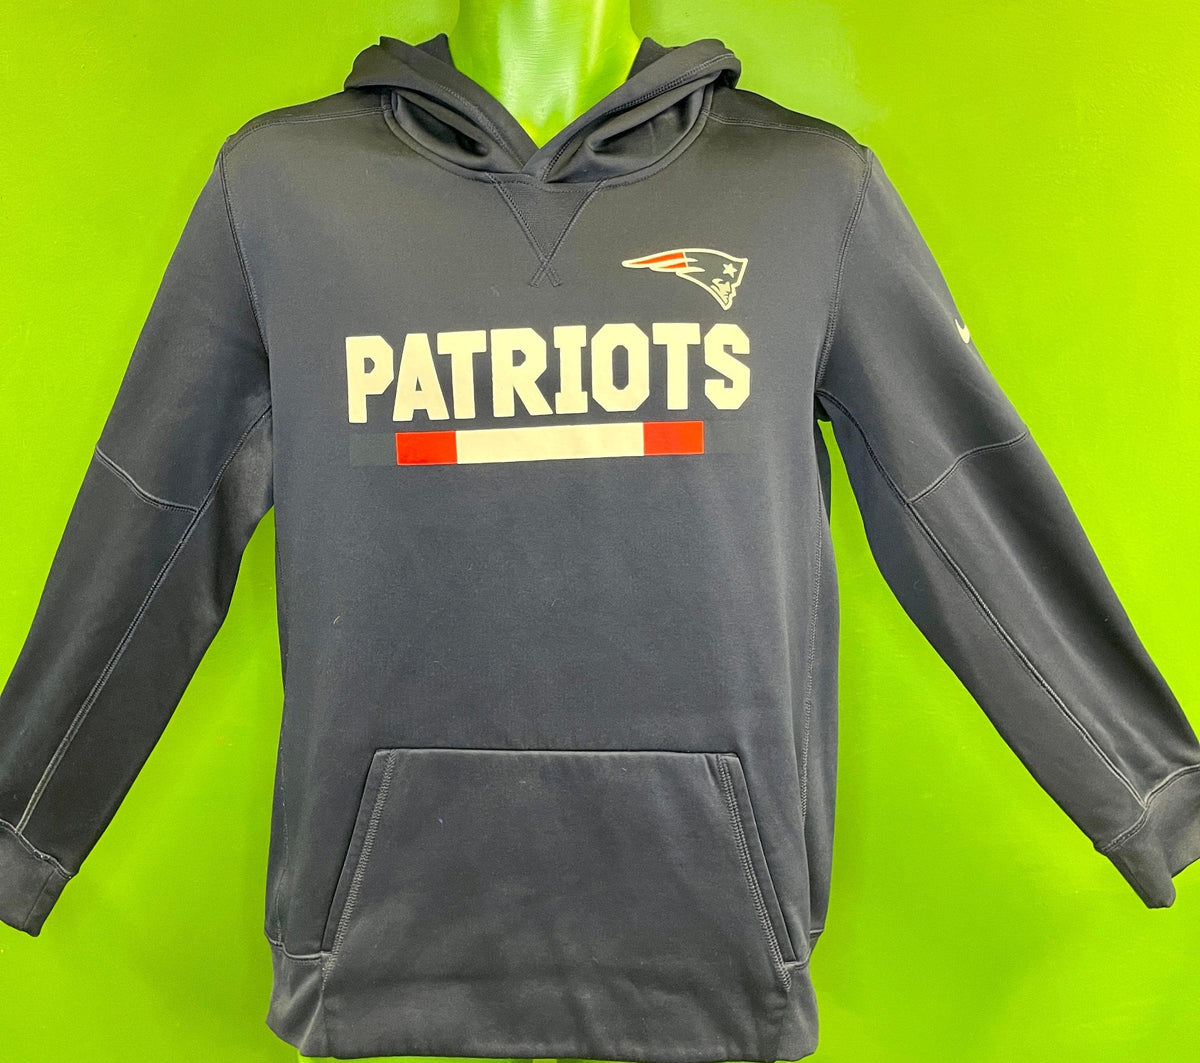 NFL New England Patriots Insulated Pullover Hoodie Youth X-Large 18-20